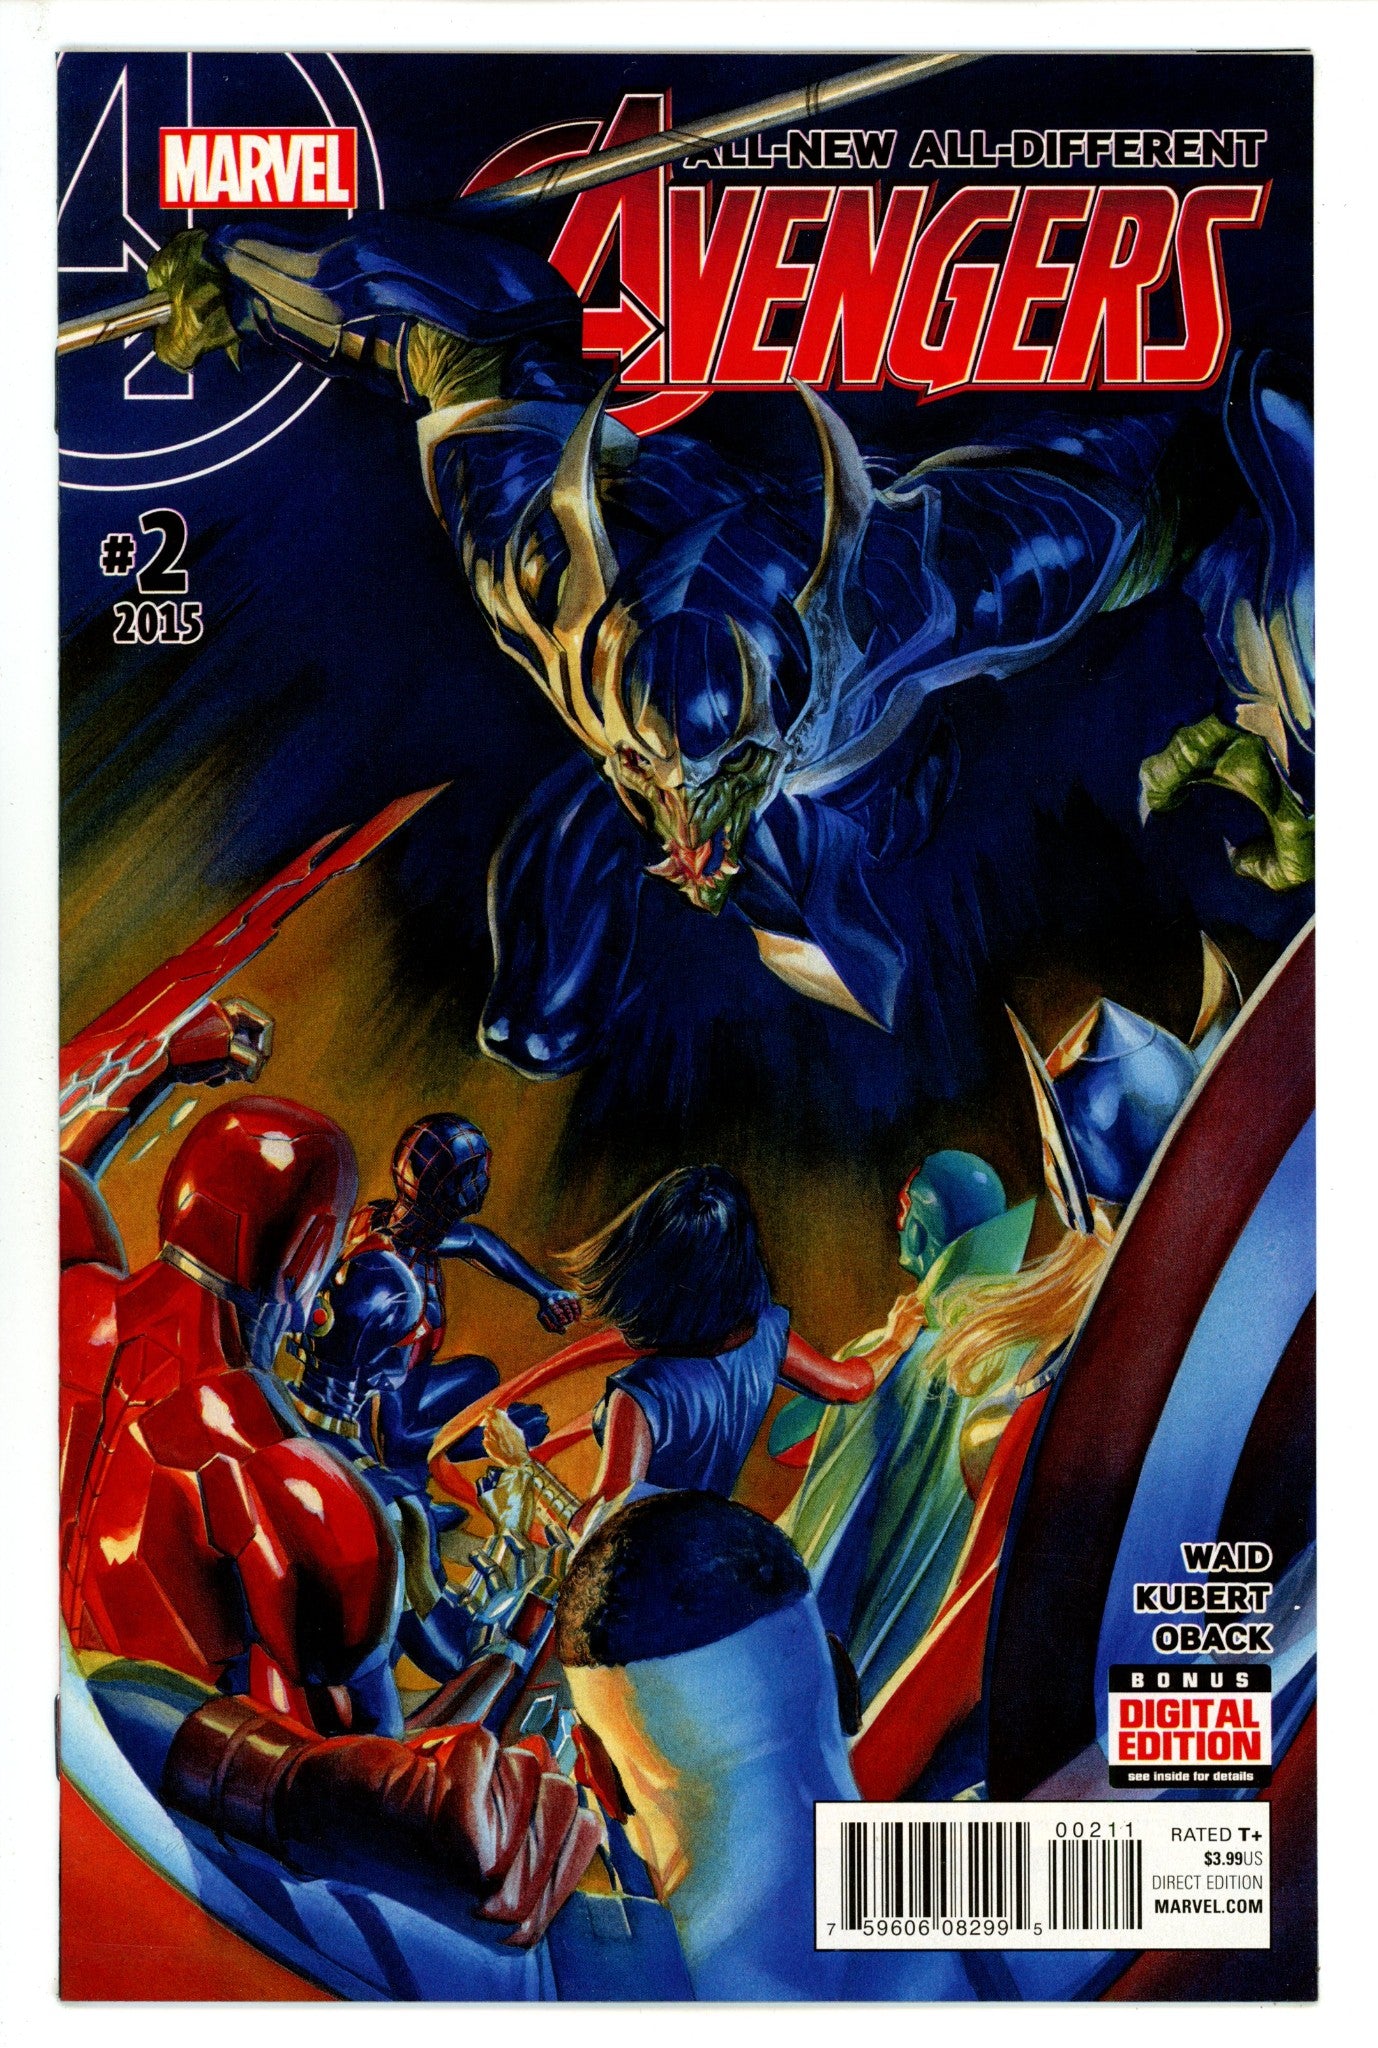 All-New, All-Different Avengers Vol 1 2 High Grade (2016) 